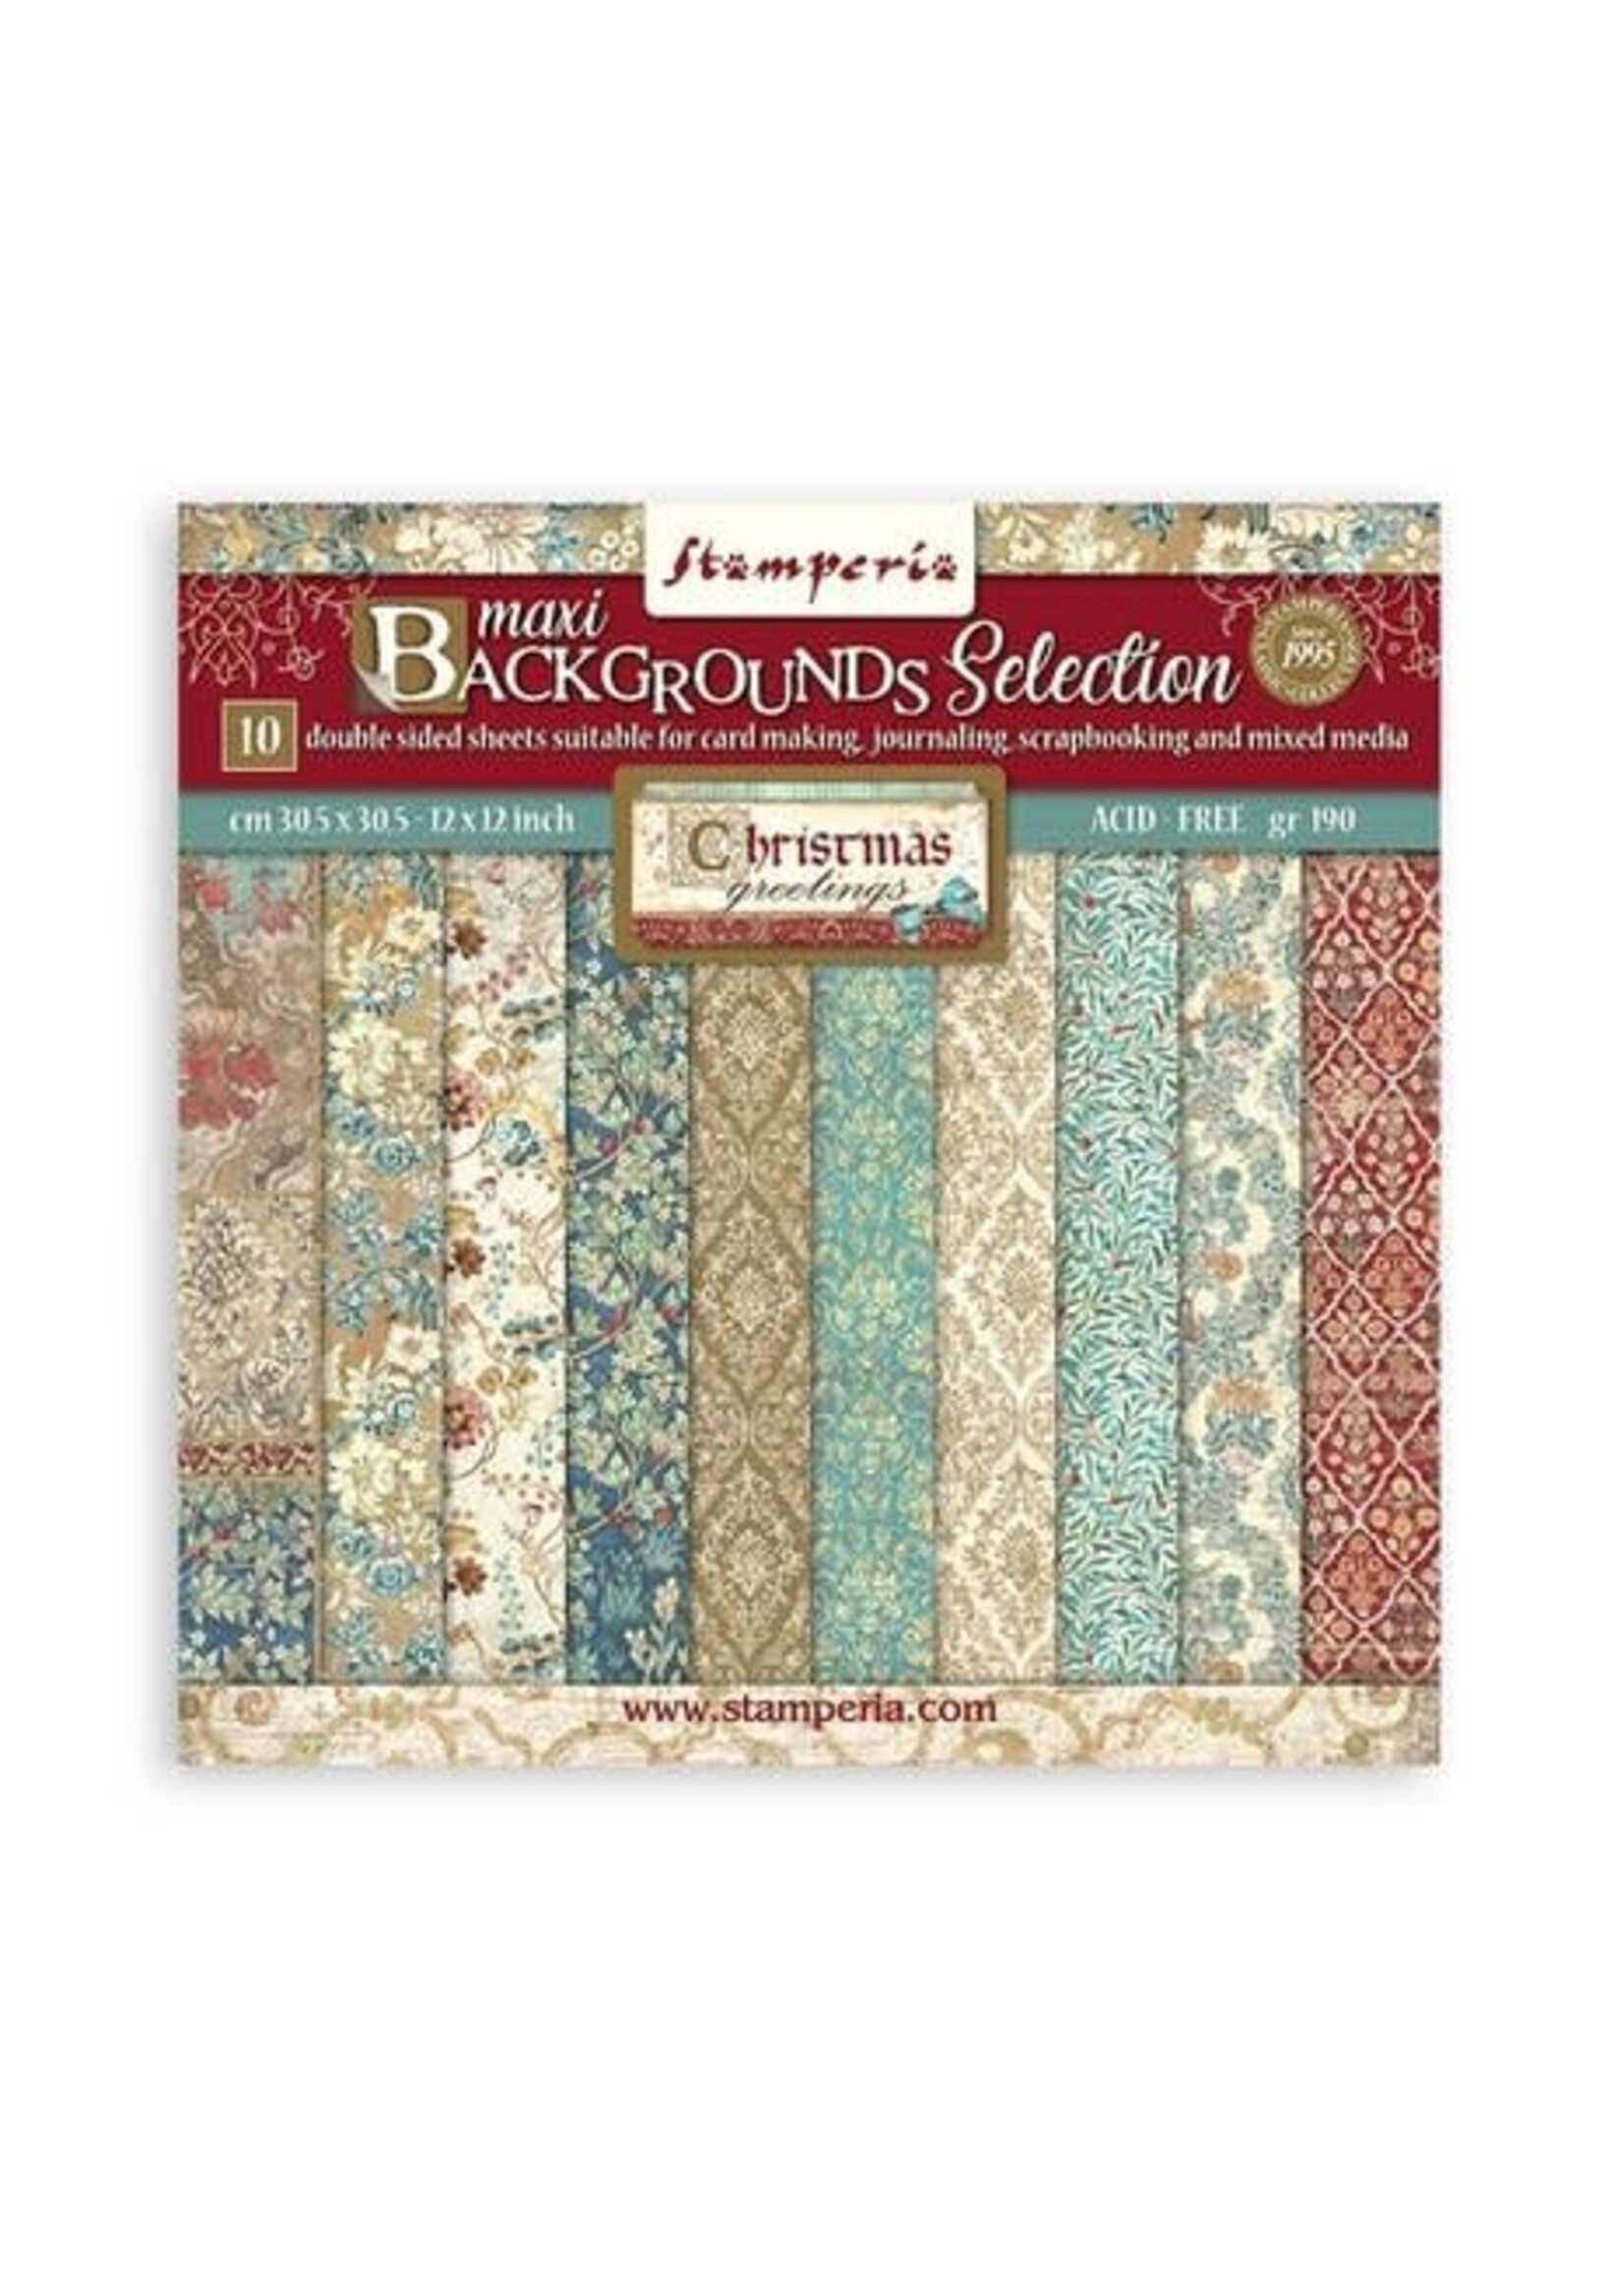 Stamperia Christmas Greetings Maxi Background Selection 12x12 Inch Paper Pack (SBBL138)